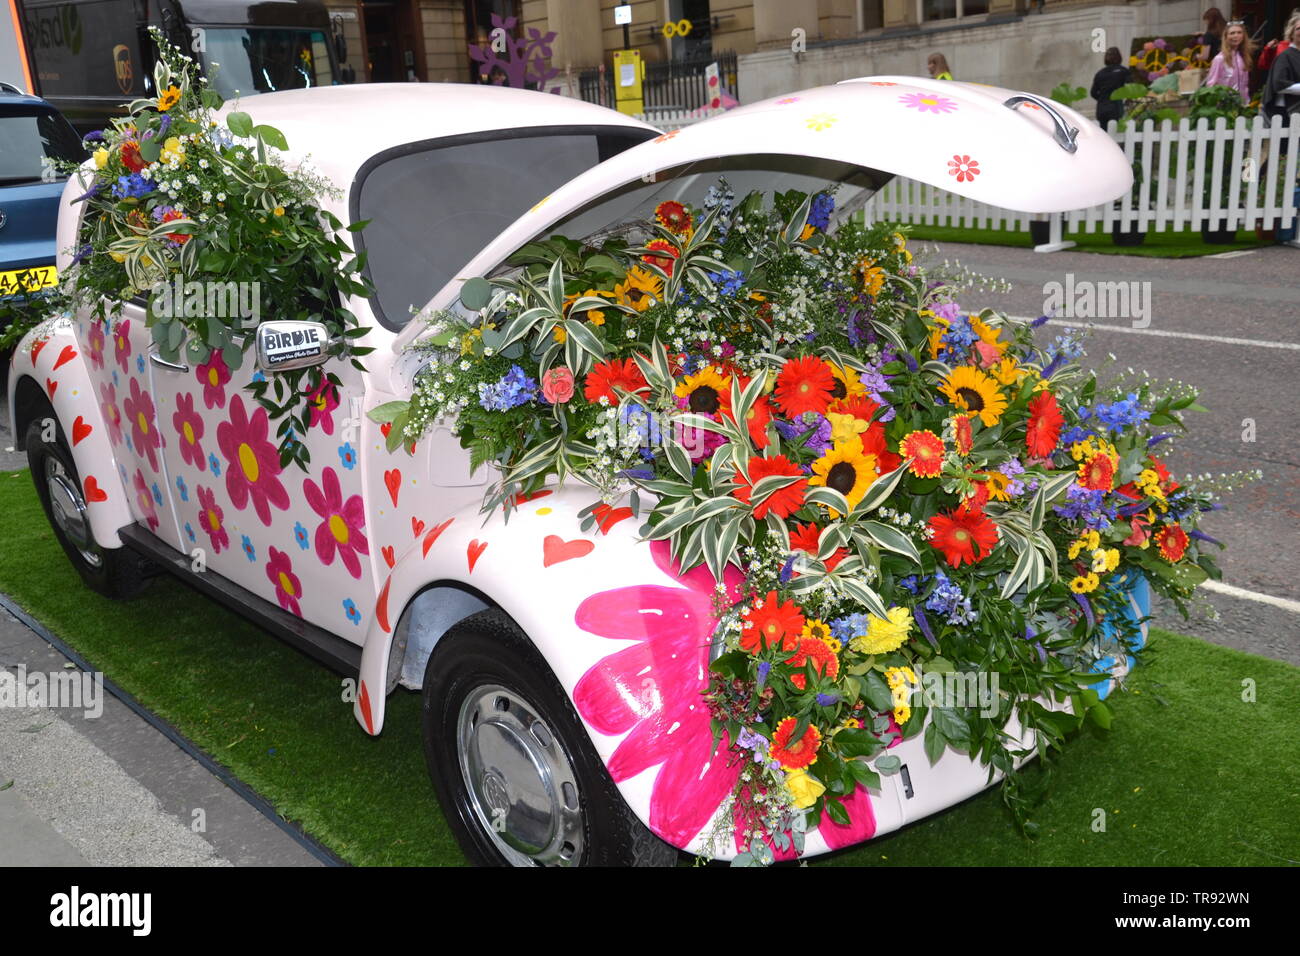 The Manchester Flower Show, part of Manchester's King Street  Festival on June 1st - 2nd, 2019, prepares to open. This year’s theme:Flower Power! Retro objects, like this Volkswagen beetle car, feature in the festival. Stock Photo